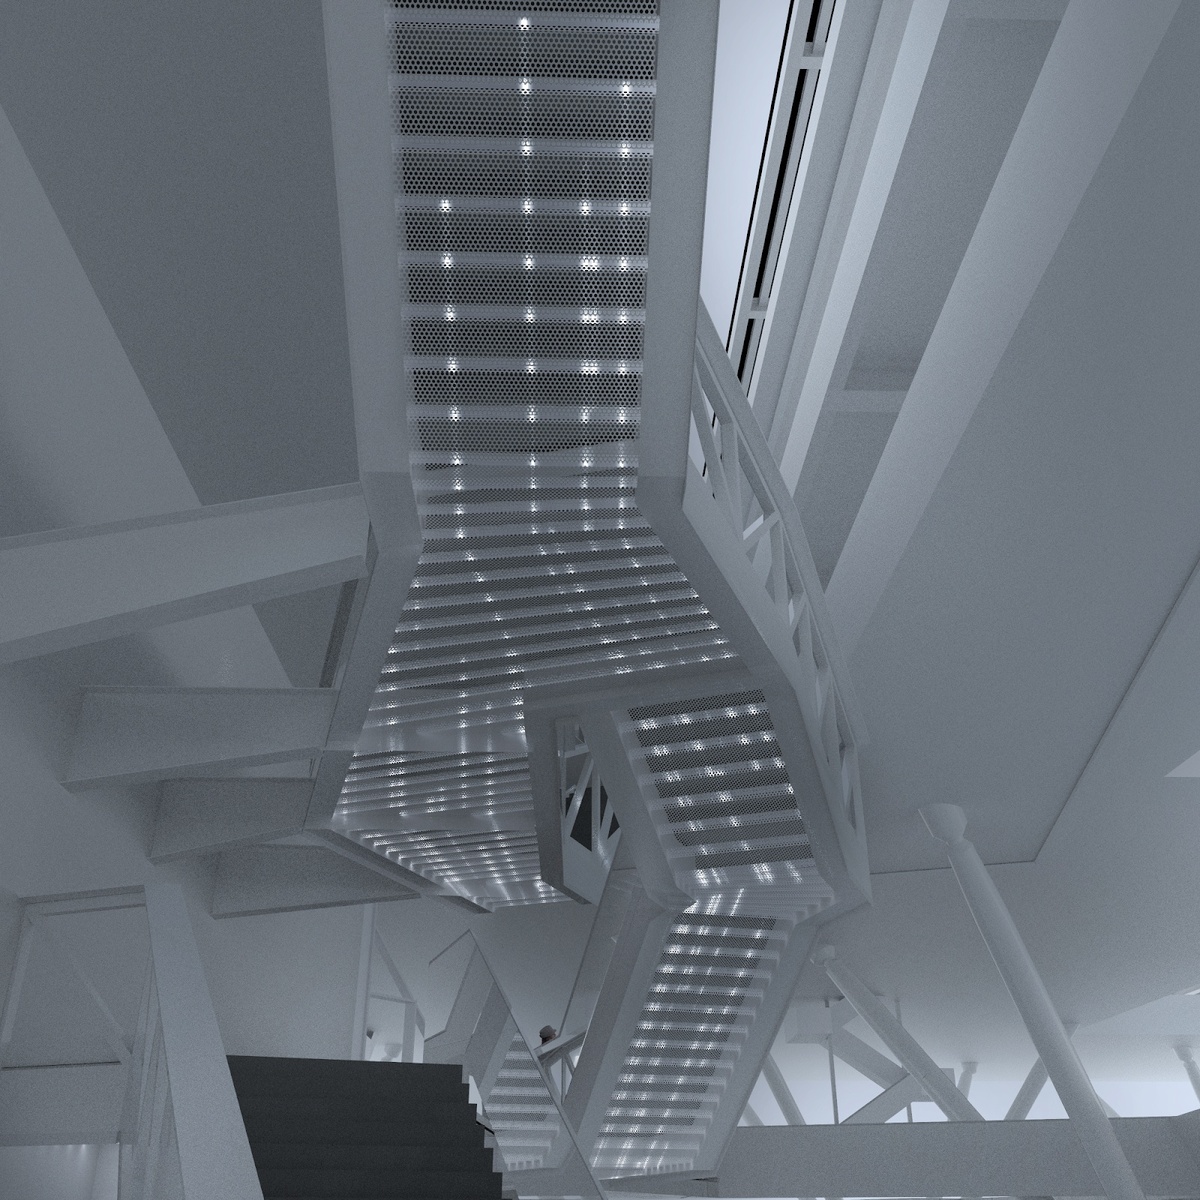 View of staircase from below, revealing light white digital content on treads. 